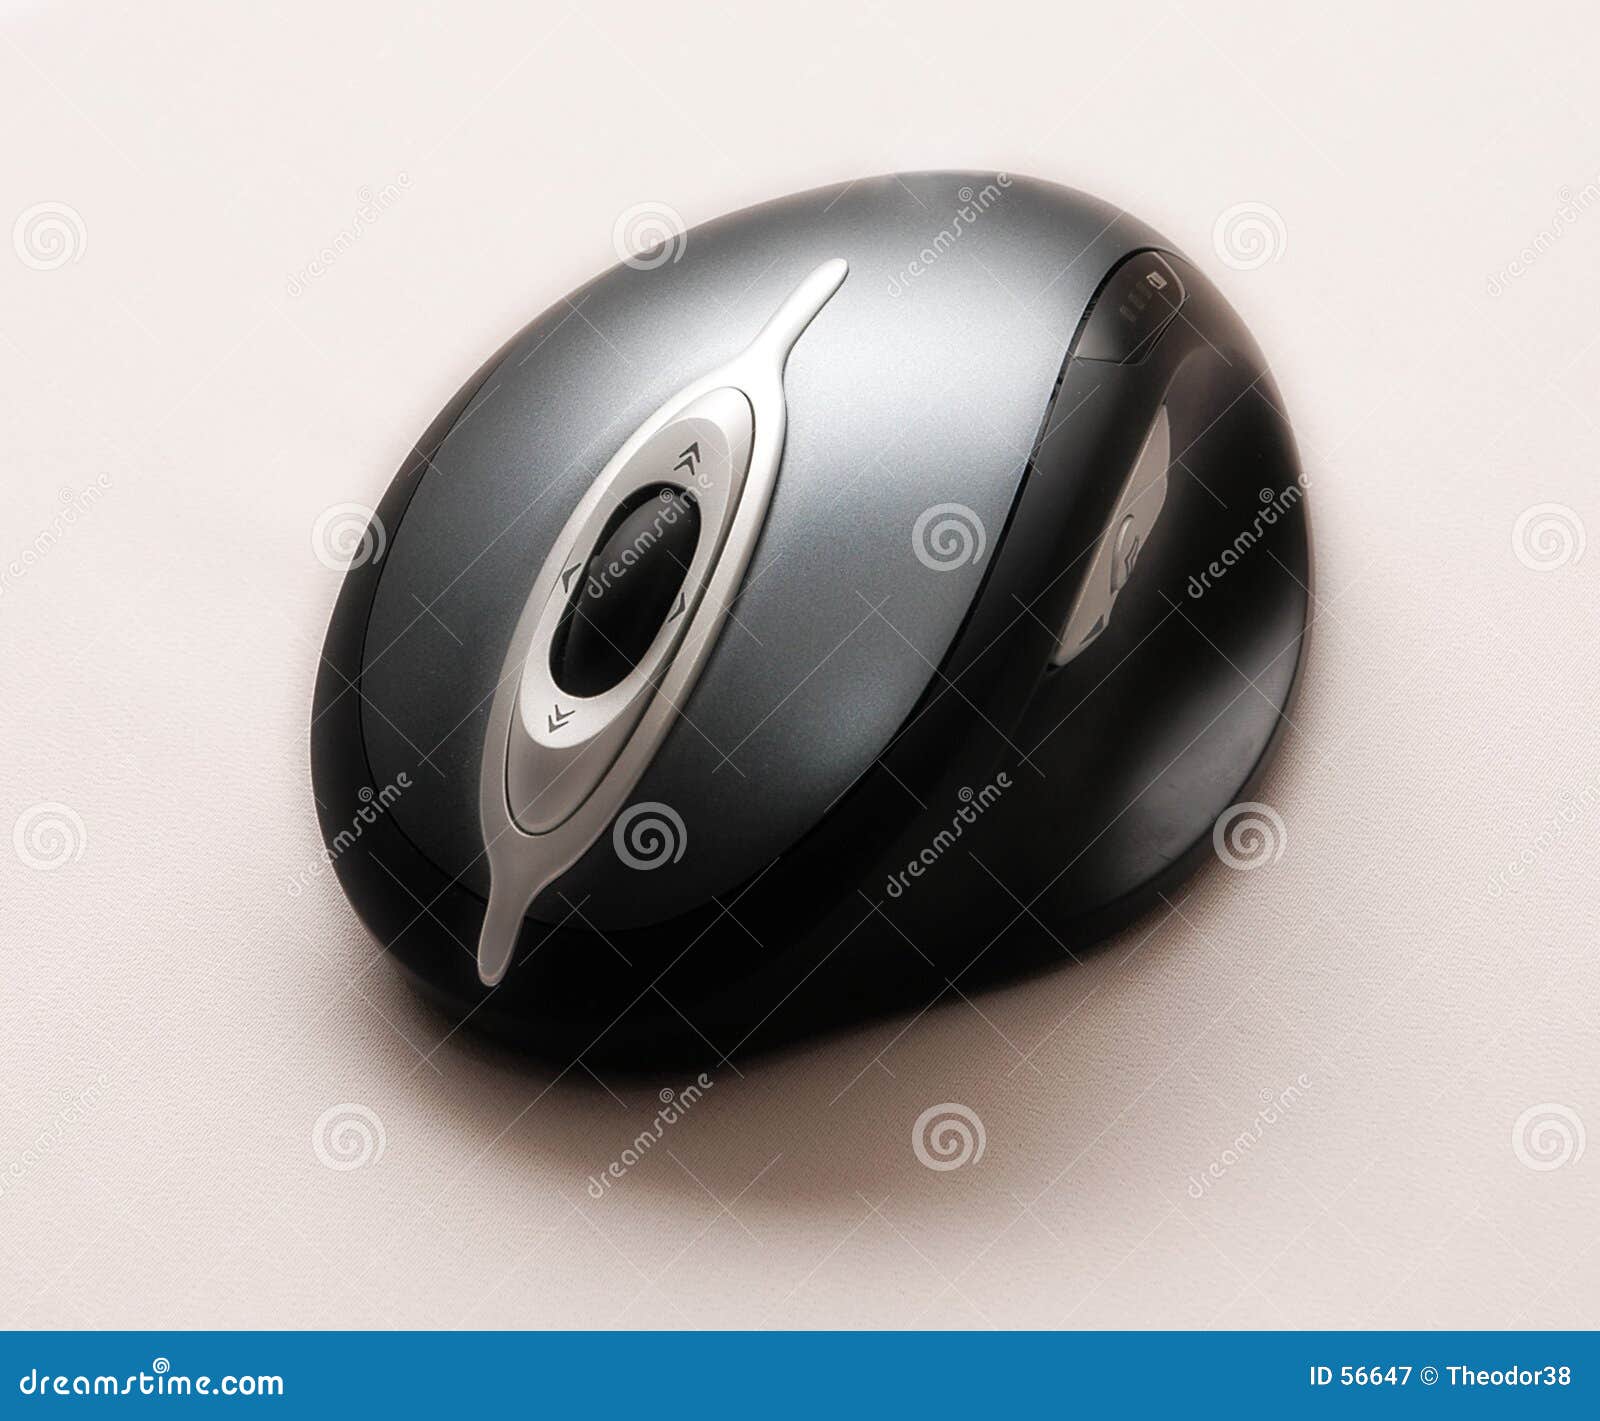 Computer mouse-1 stock image. Image of tech, keyboard, office - 56647